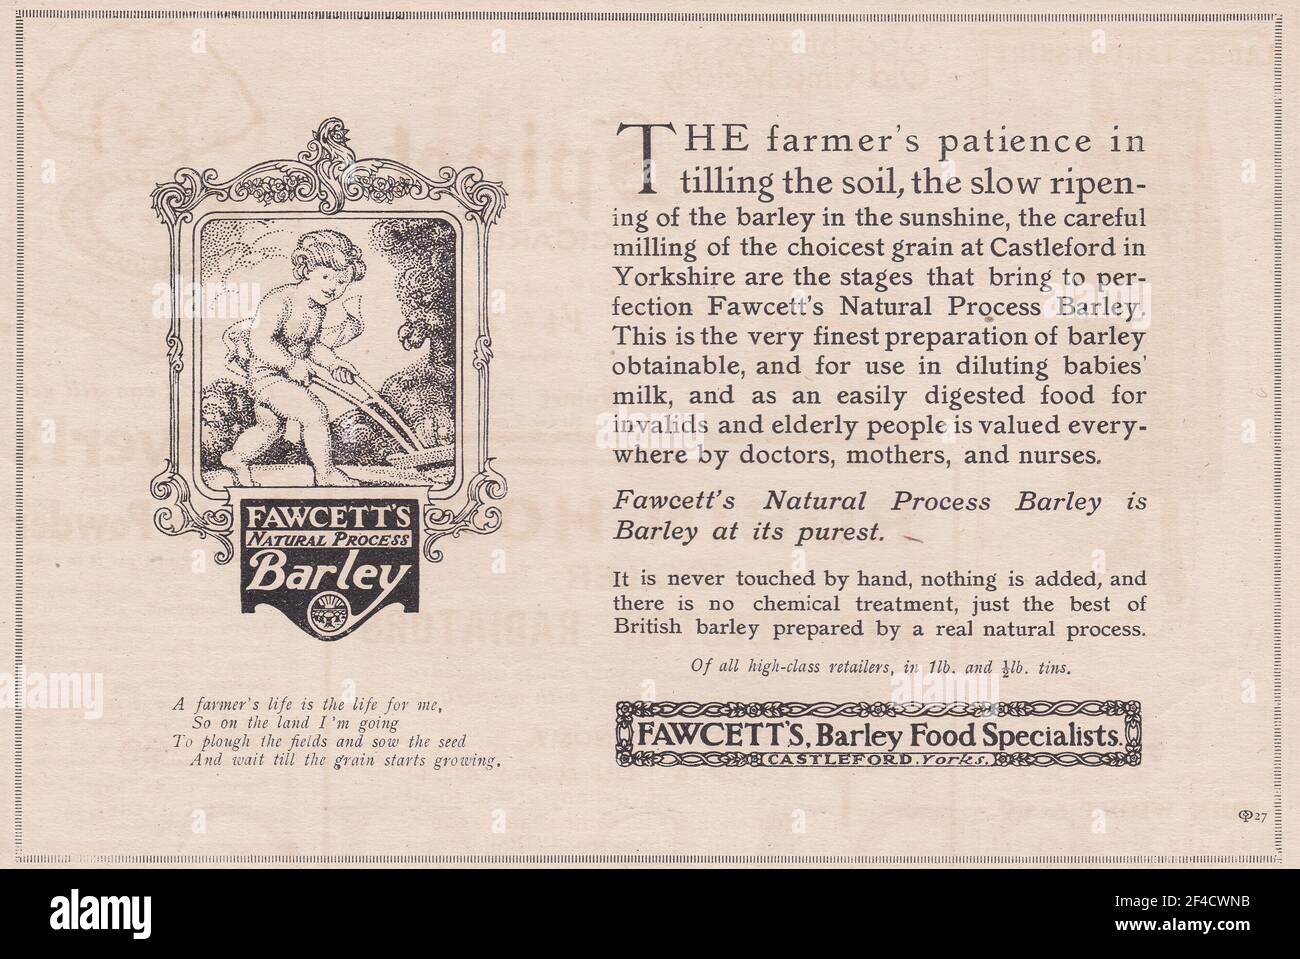 Vintage advert for Fawcett's Natural Process Barley by Fawcett's Barley Food Specialists. Stock Photo